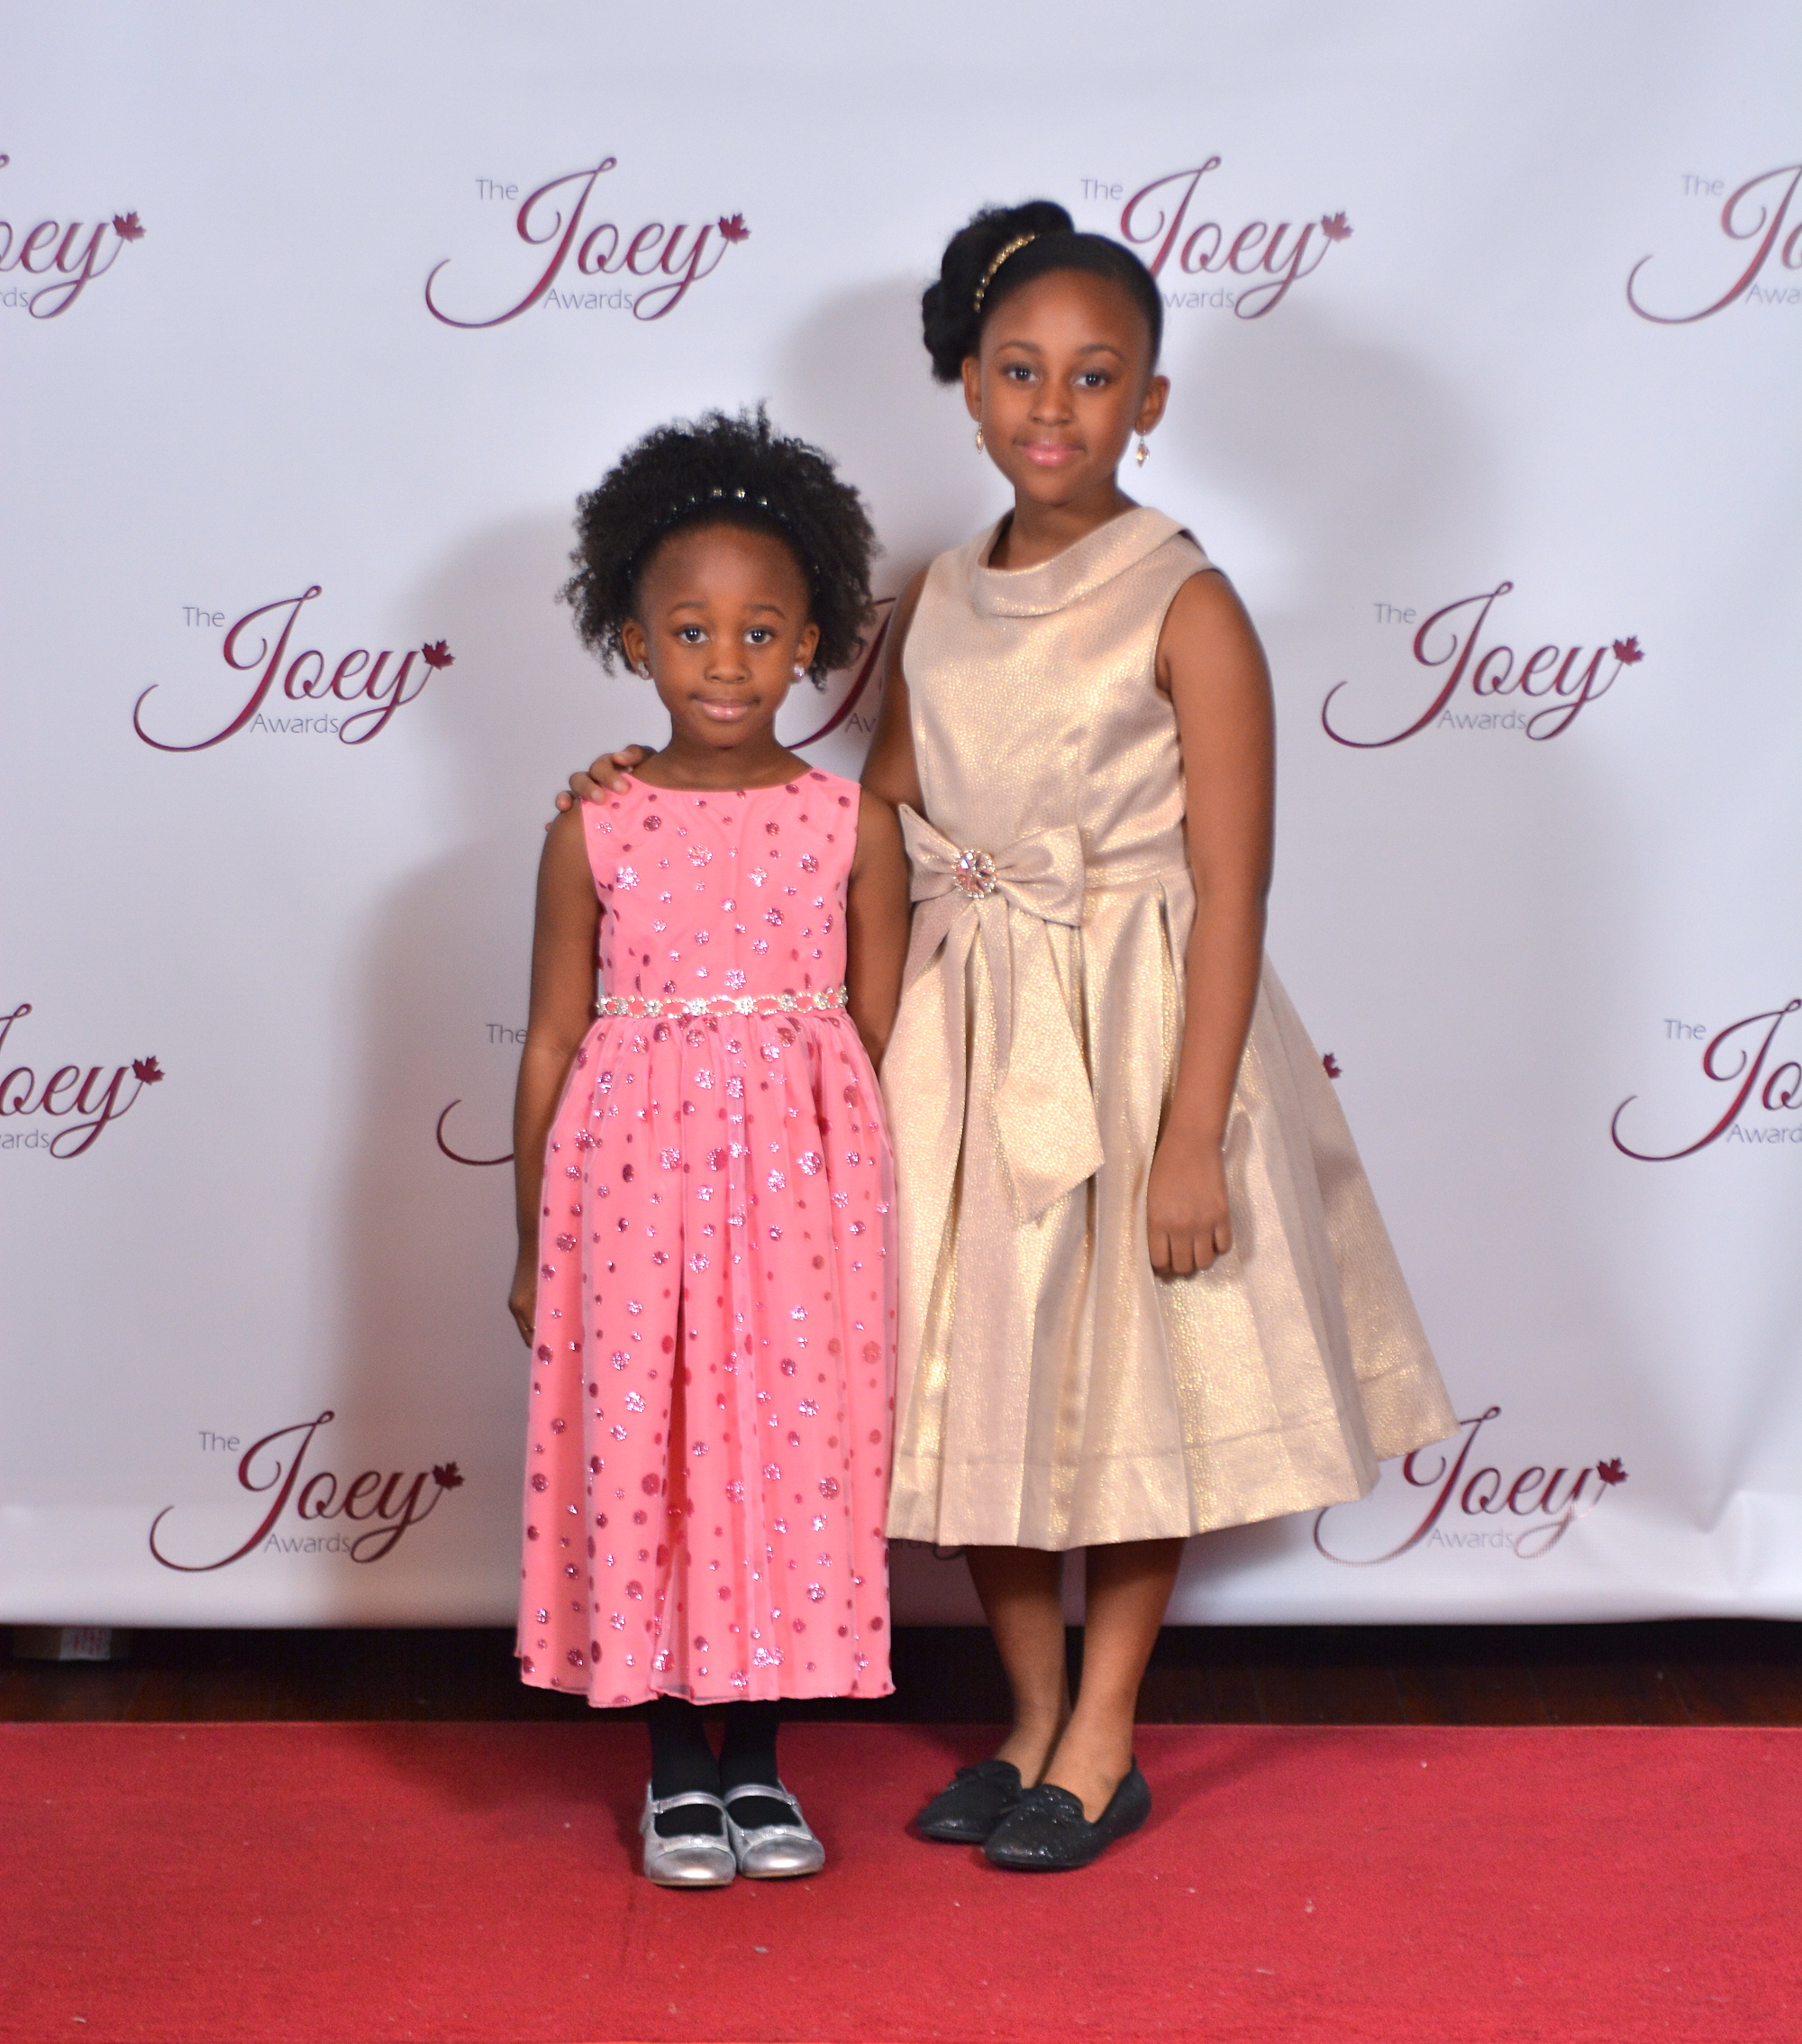 Ava with her sister Allison at the 2014 Joey Awards in Vancouver